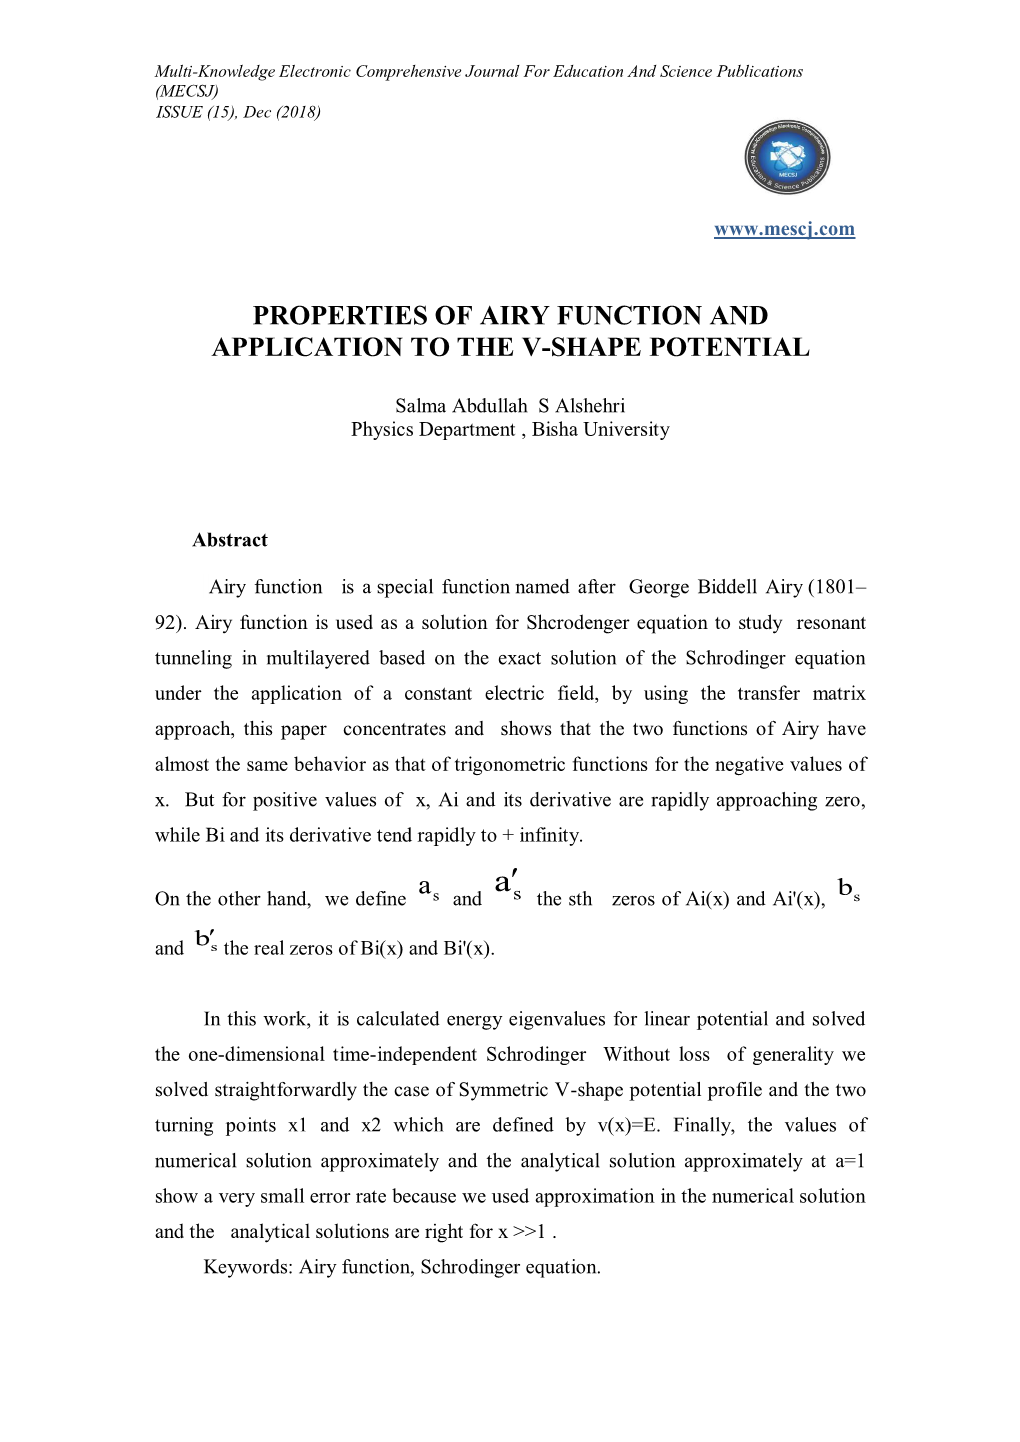 Properties of Airy Function and Application to the V-Shape Potential